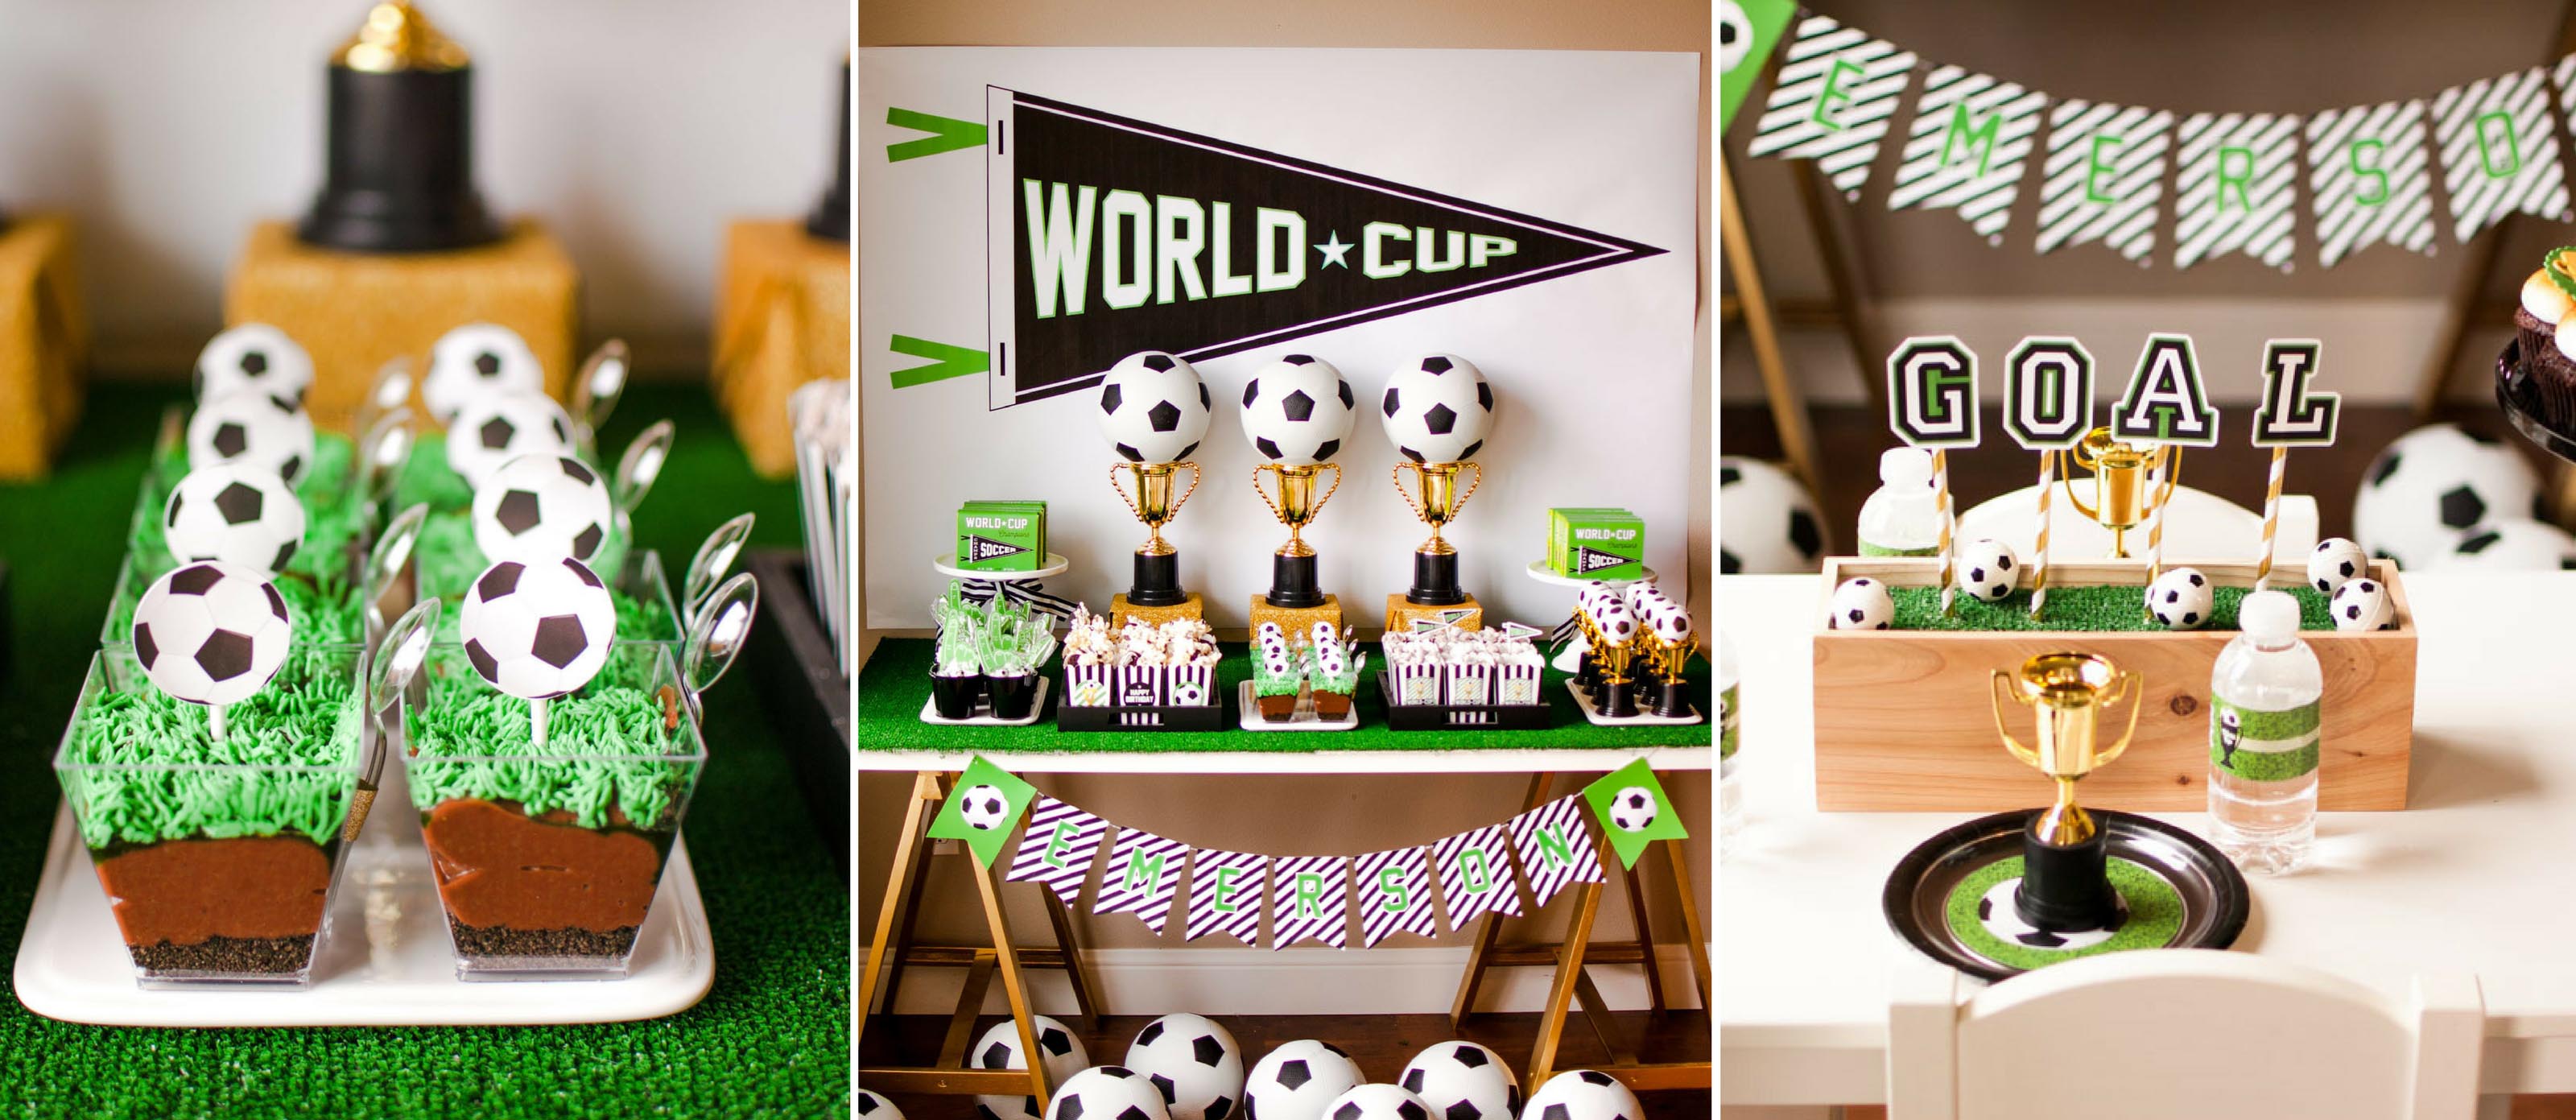 Amazon Com Soccer Theme Birthday Party Decorations Kit Baby Boy Birthday Kid S Room Photo Backdrop Decoration 7 Pieces Sunbeauty Arts Crafts Sewing